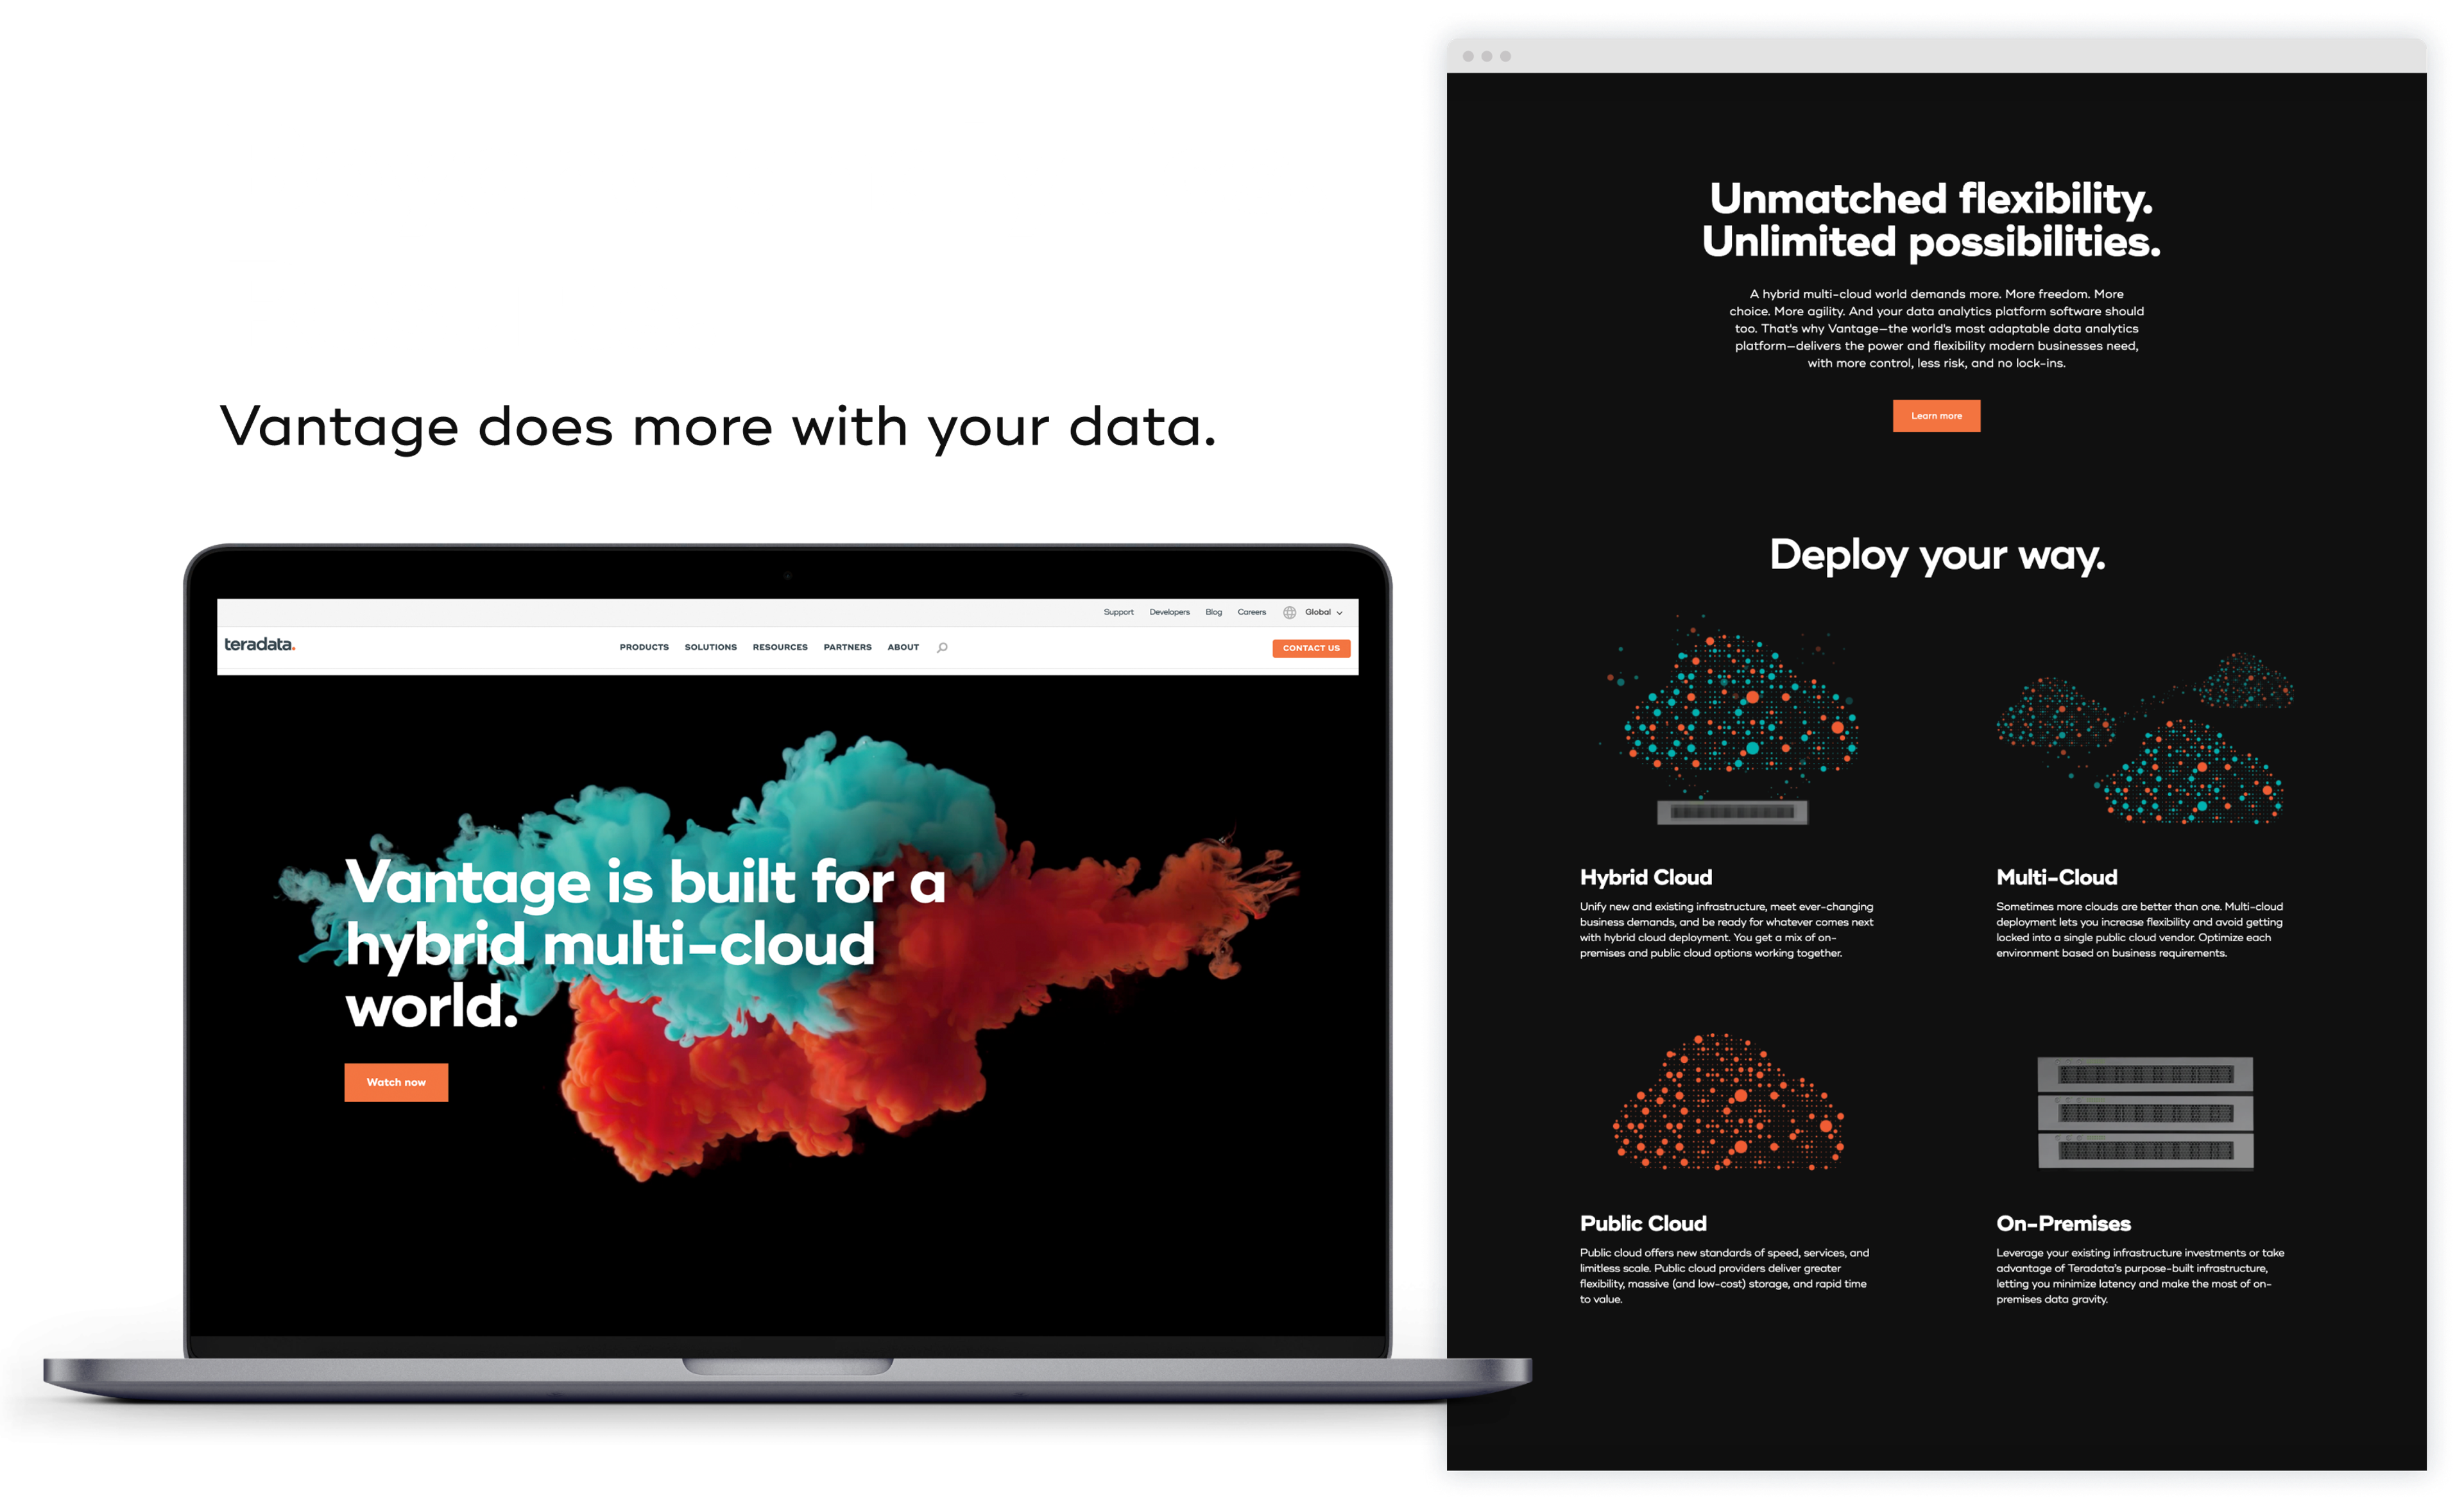 Beyond analytics. Results. Vantage does more with your data.